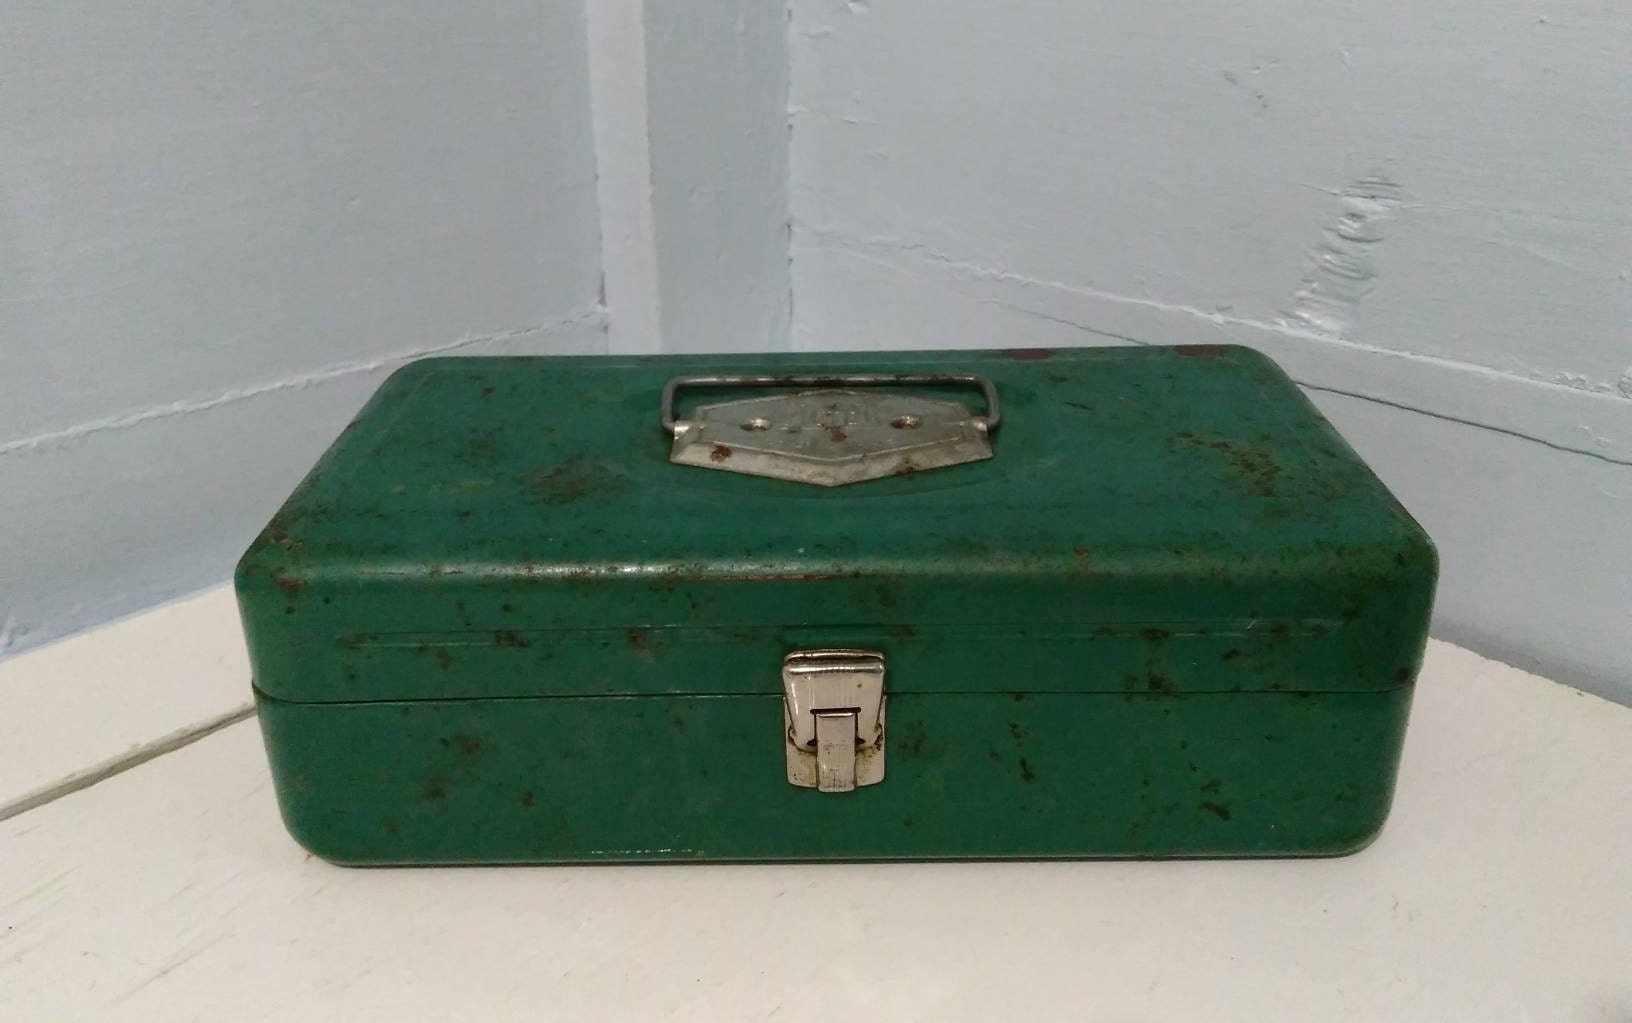 Vintage 60s Green Victor Metal Tackle Box Tool Box Craft Box with Tray  Shabby Chic Metal Box Gift for Him Photo Prop RhymeswithDaughter